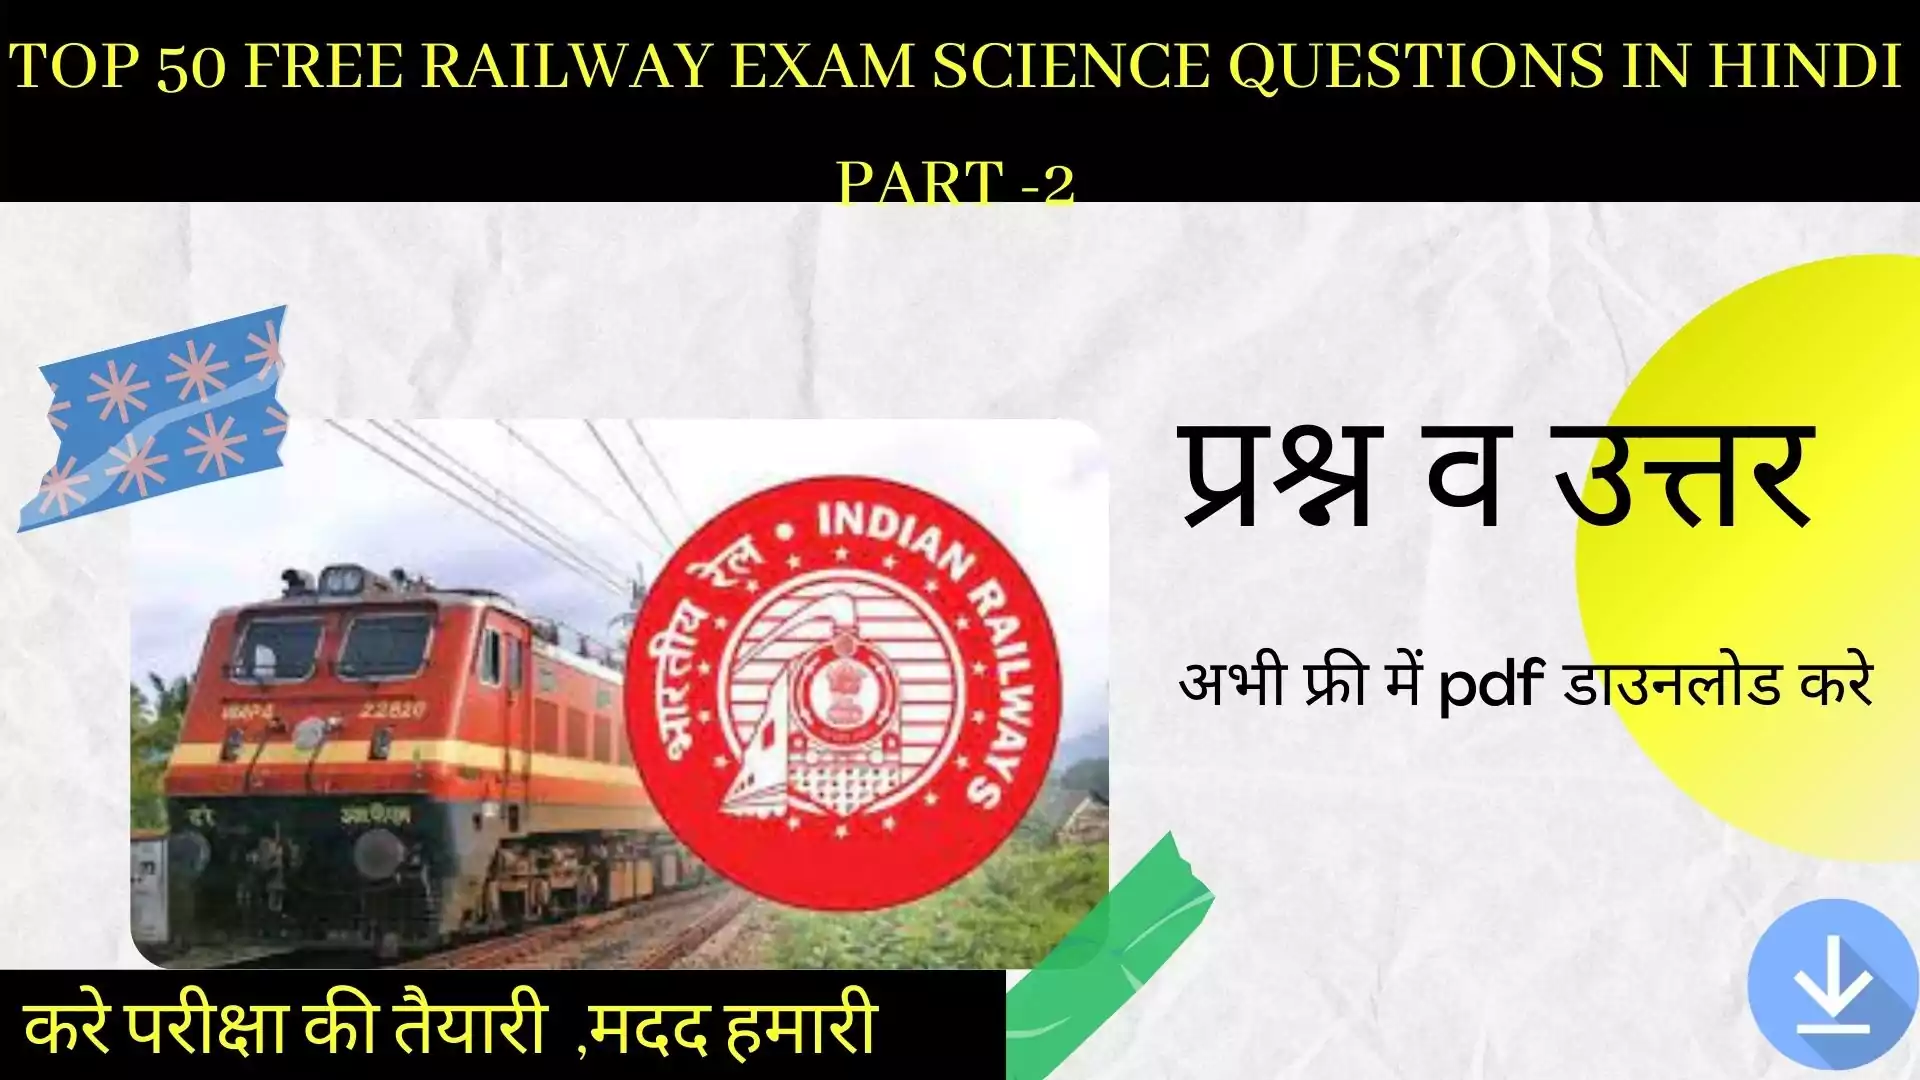 Top 50 Exam science questions in hindi pdf Download